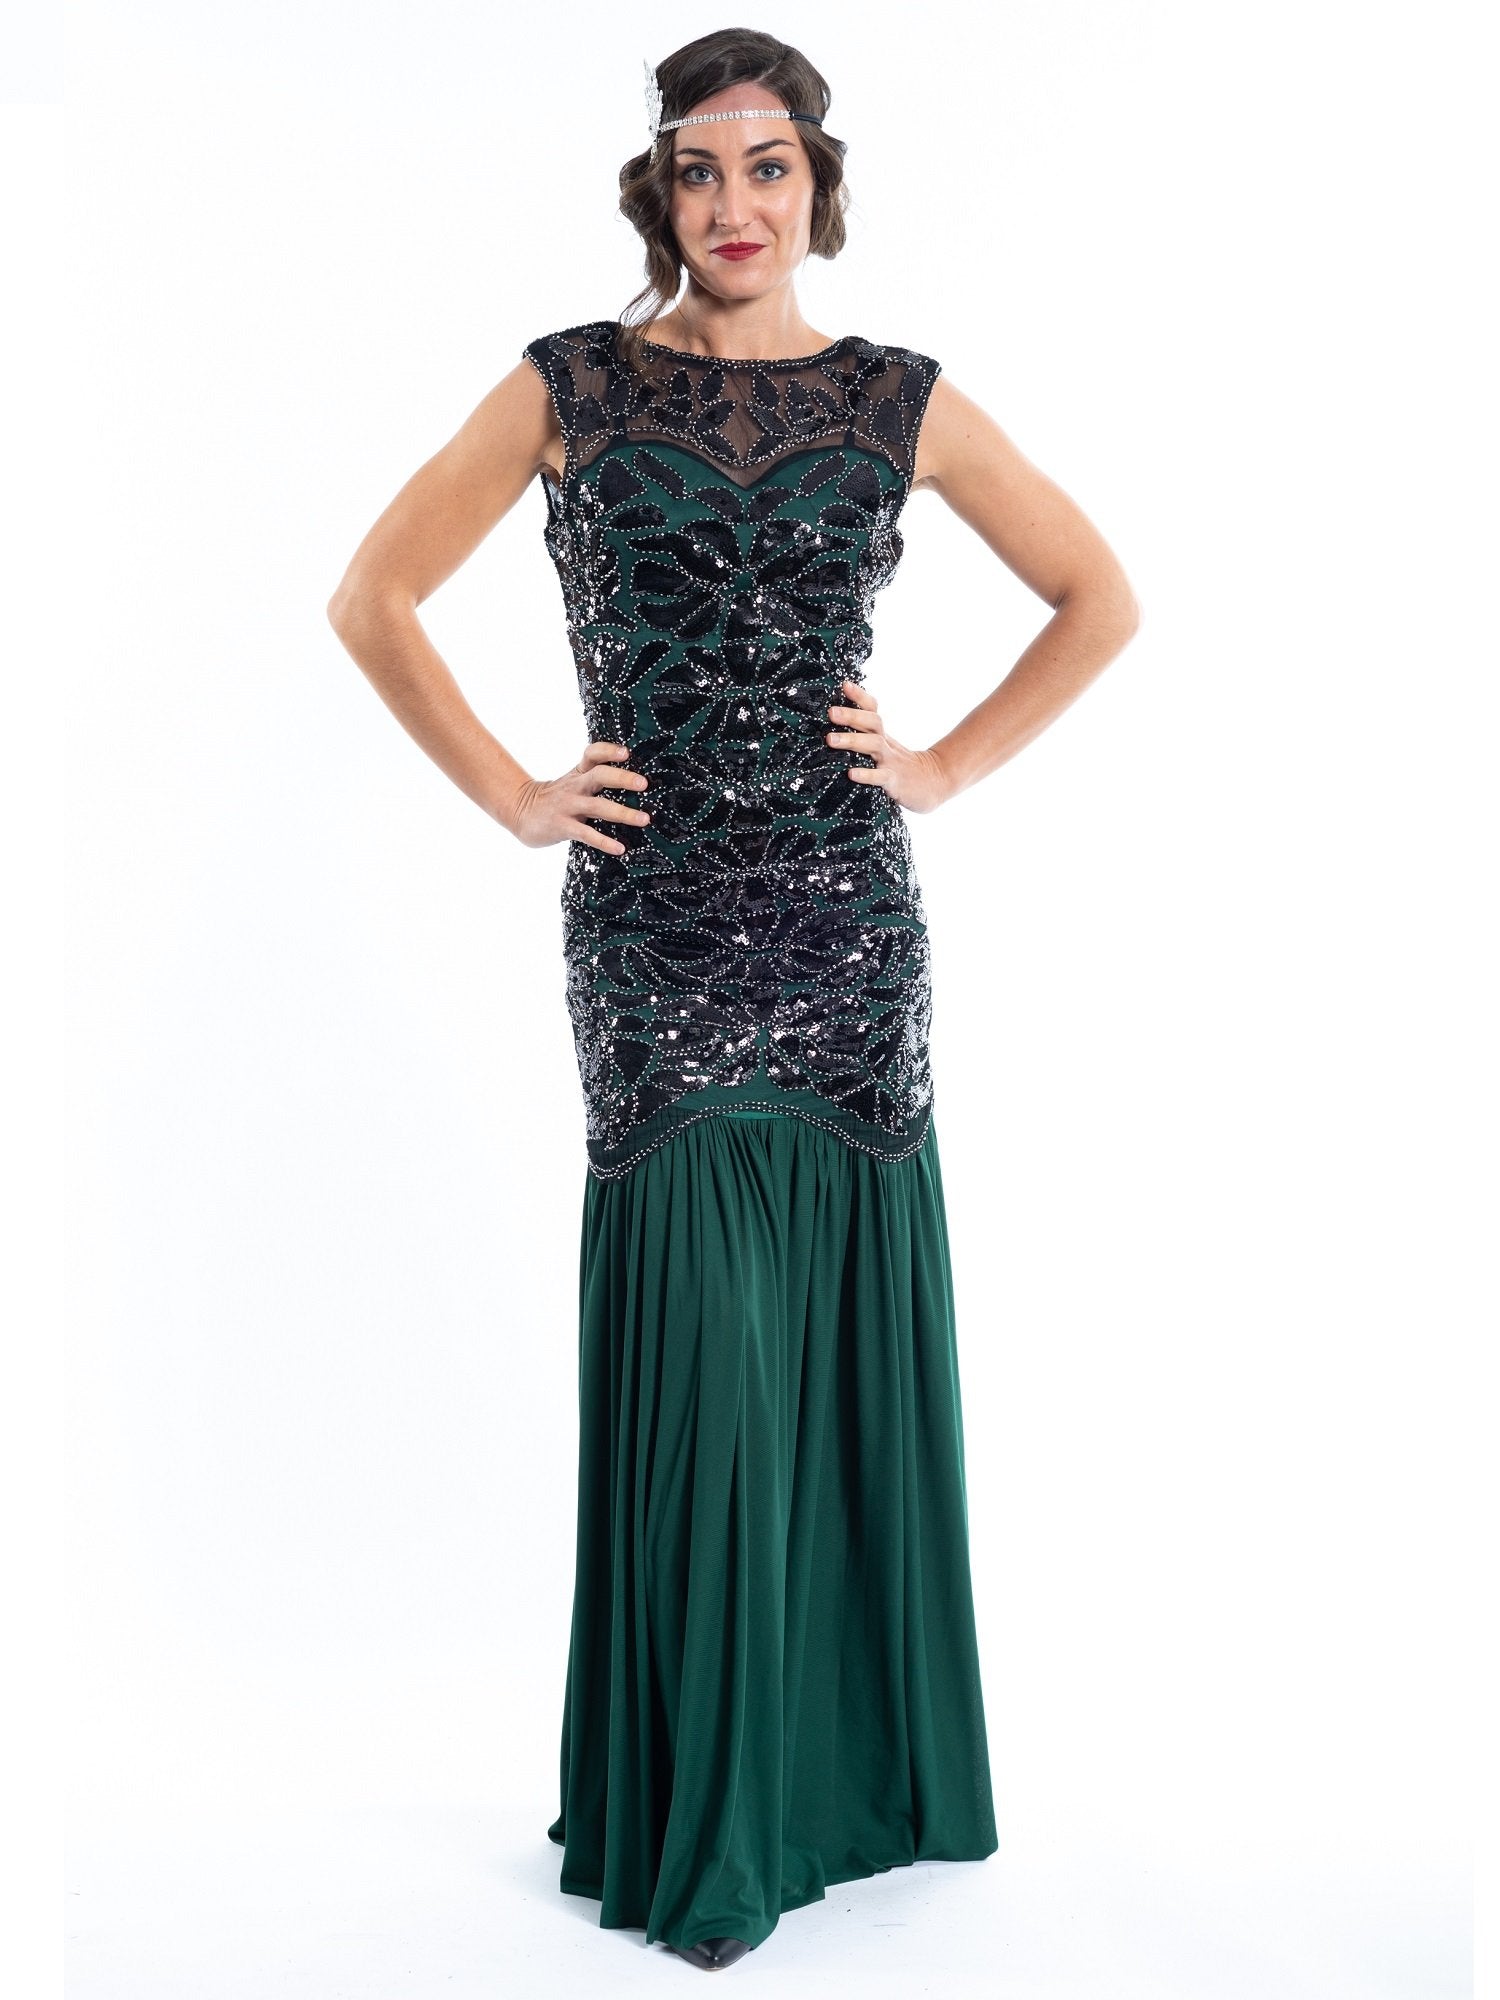 A long green flapper dress with black sequins and beads